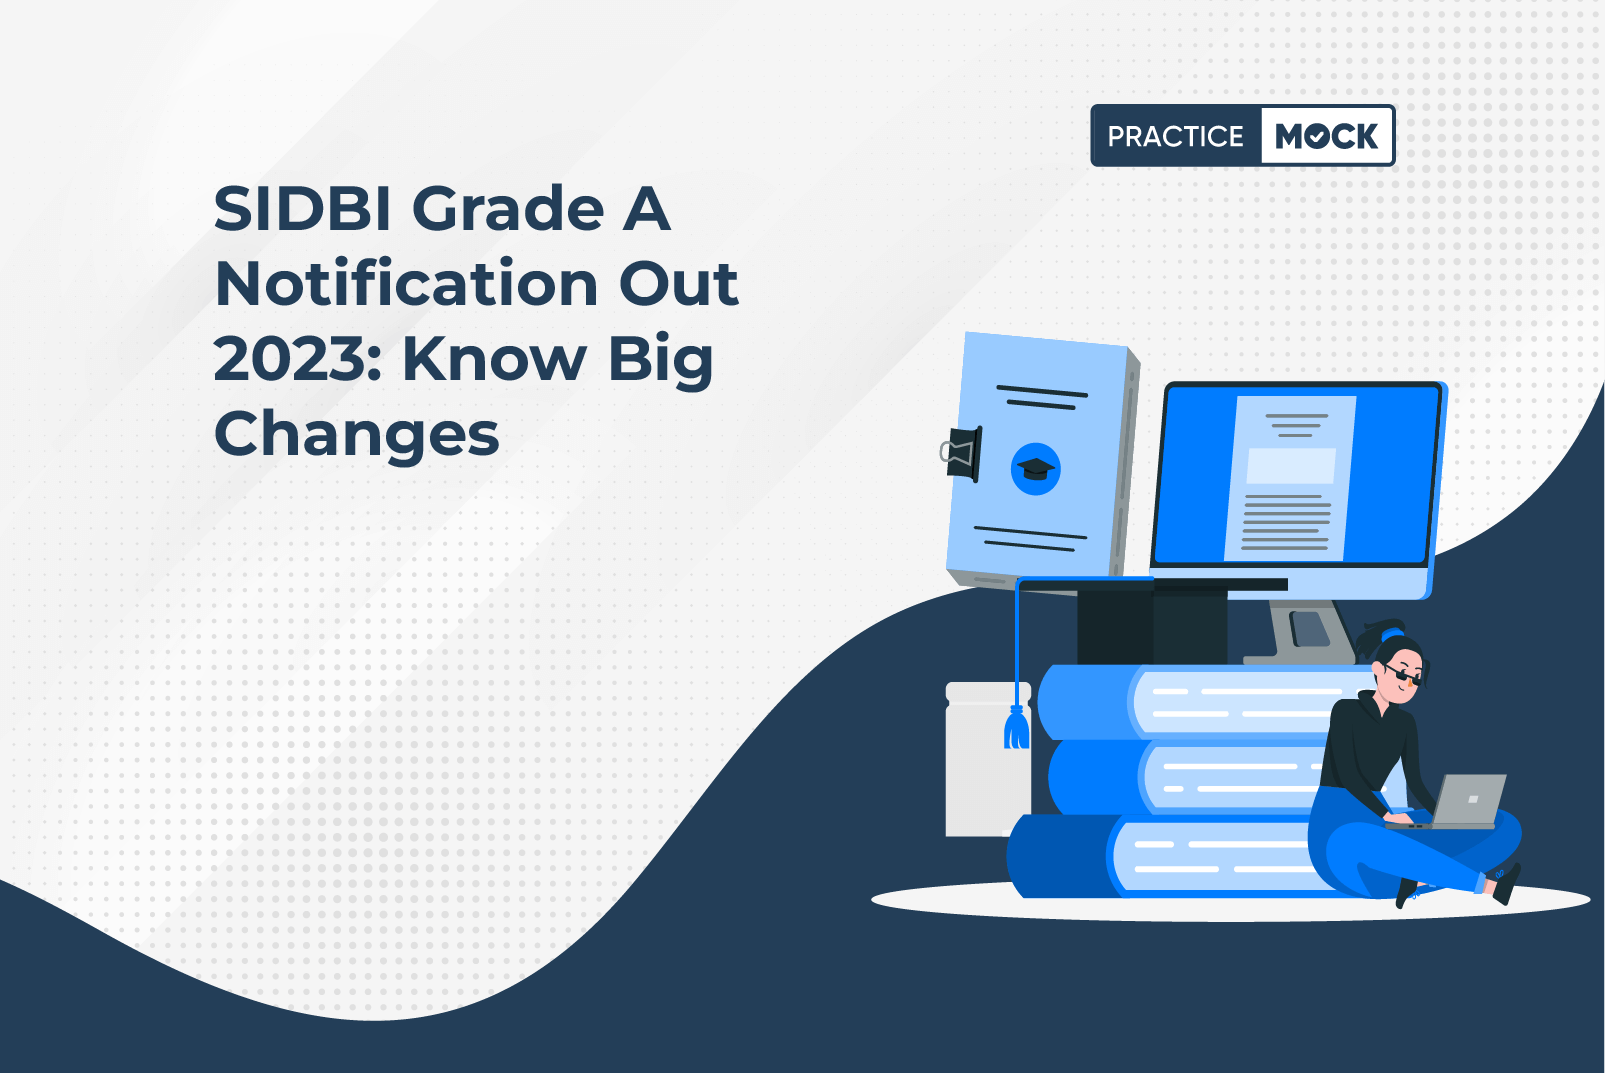 SIDBI Grade A Notification Out 2023 Know Big Changes